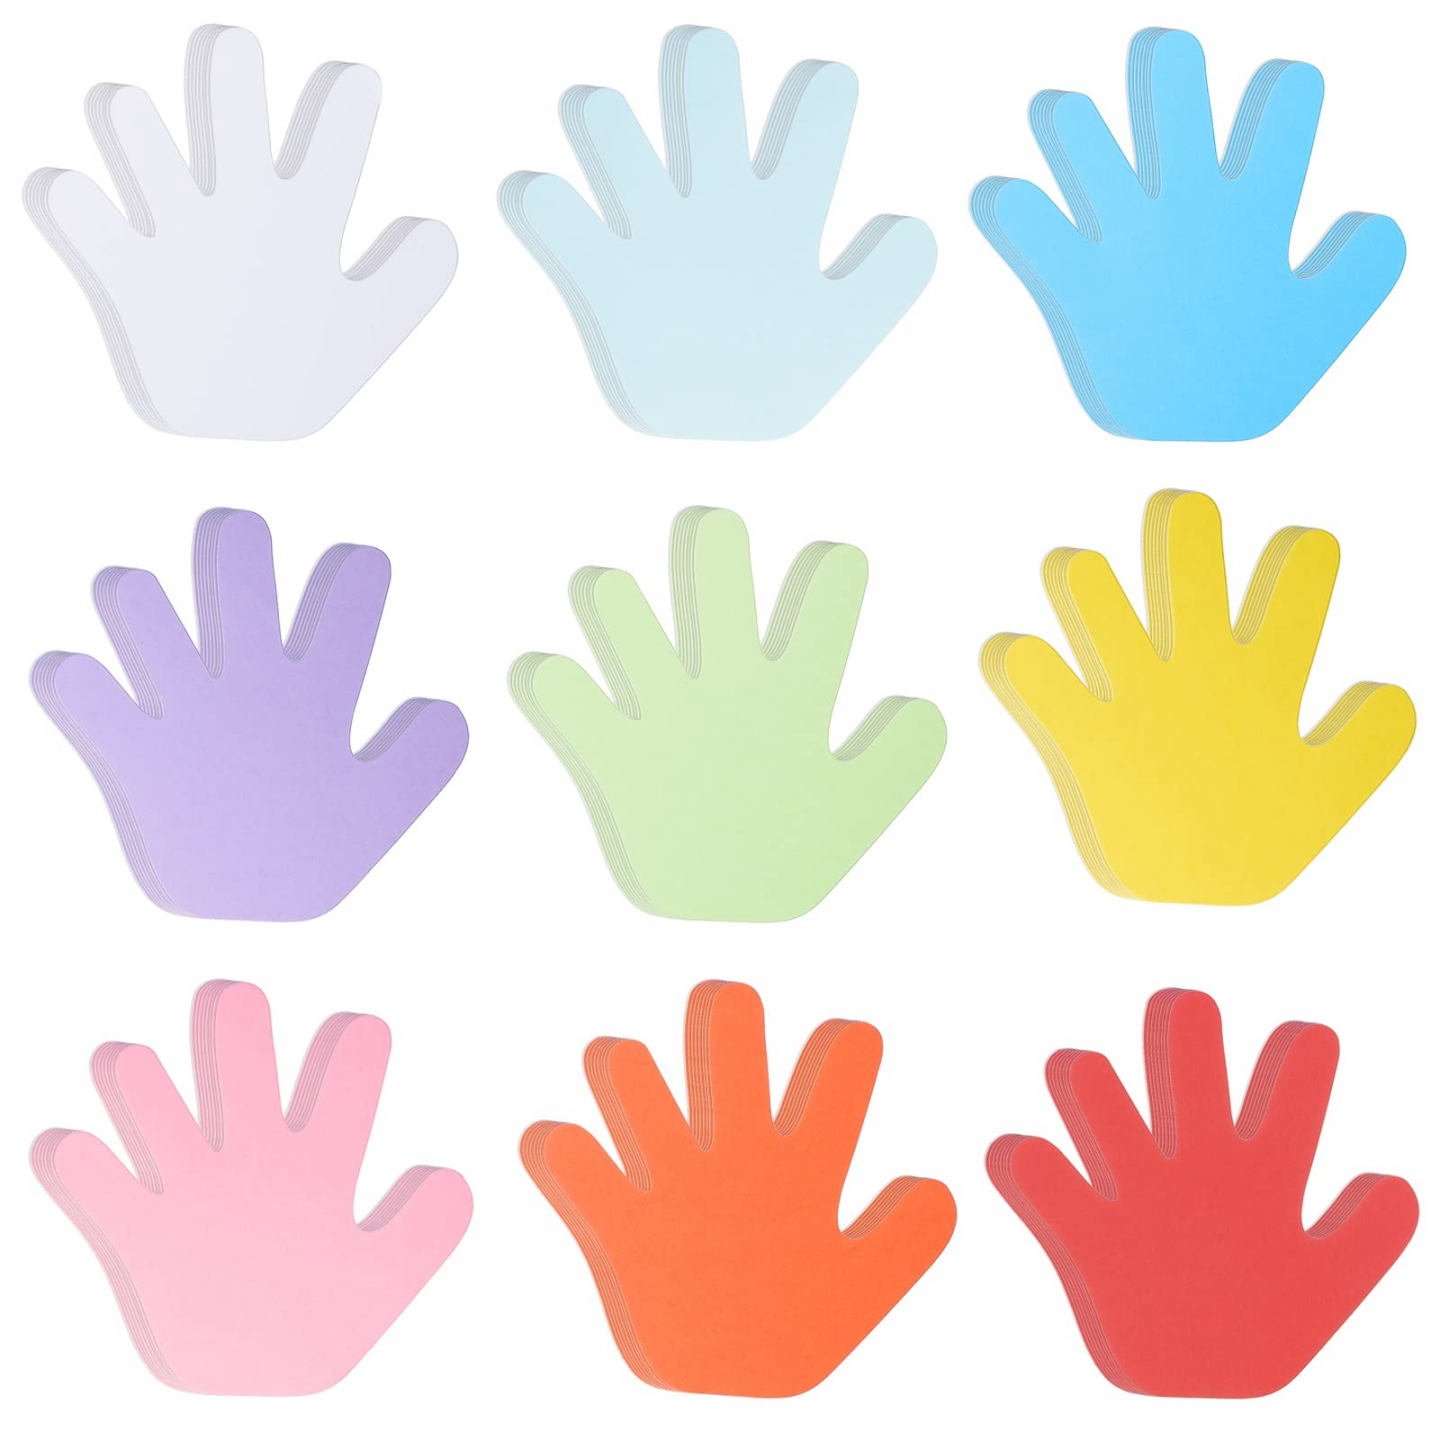 Pieces Hand Cutouts Paper Hand Shape Cut-Outs Assorted Color Handprint  Shape Cutouts Blank Creative Paper Cutouts for Kids DIY Craft Art Project   - FREE Printables - Cut Out Hands